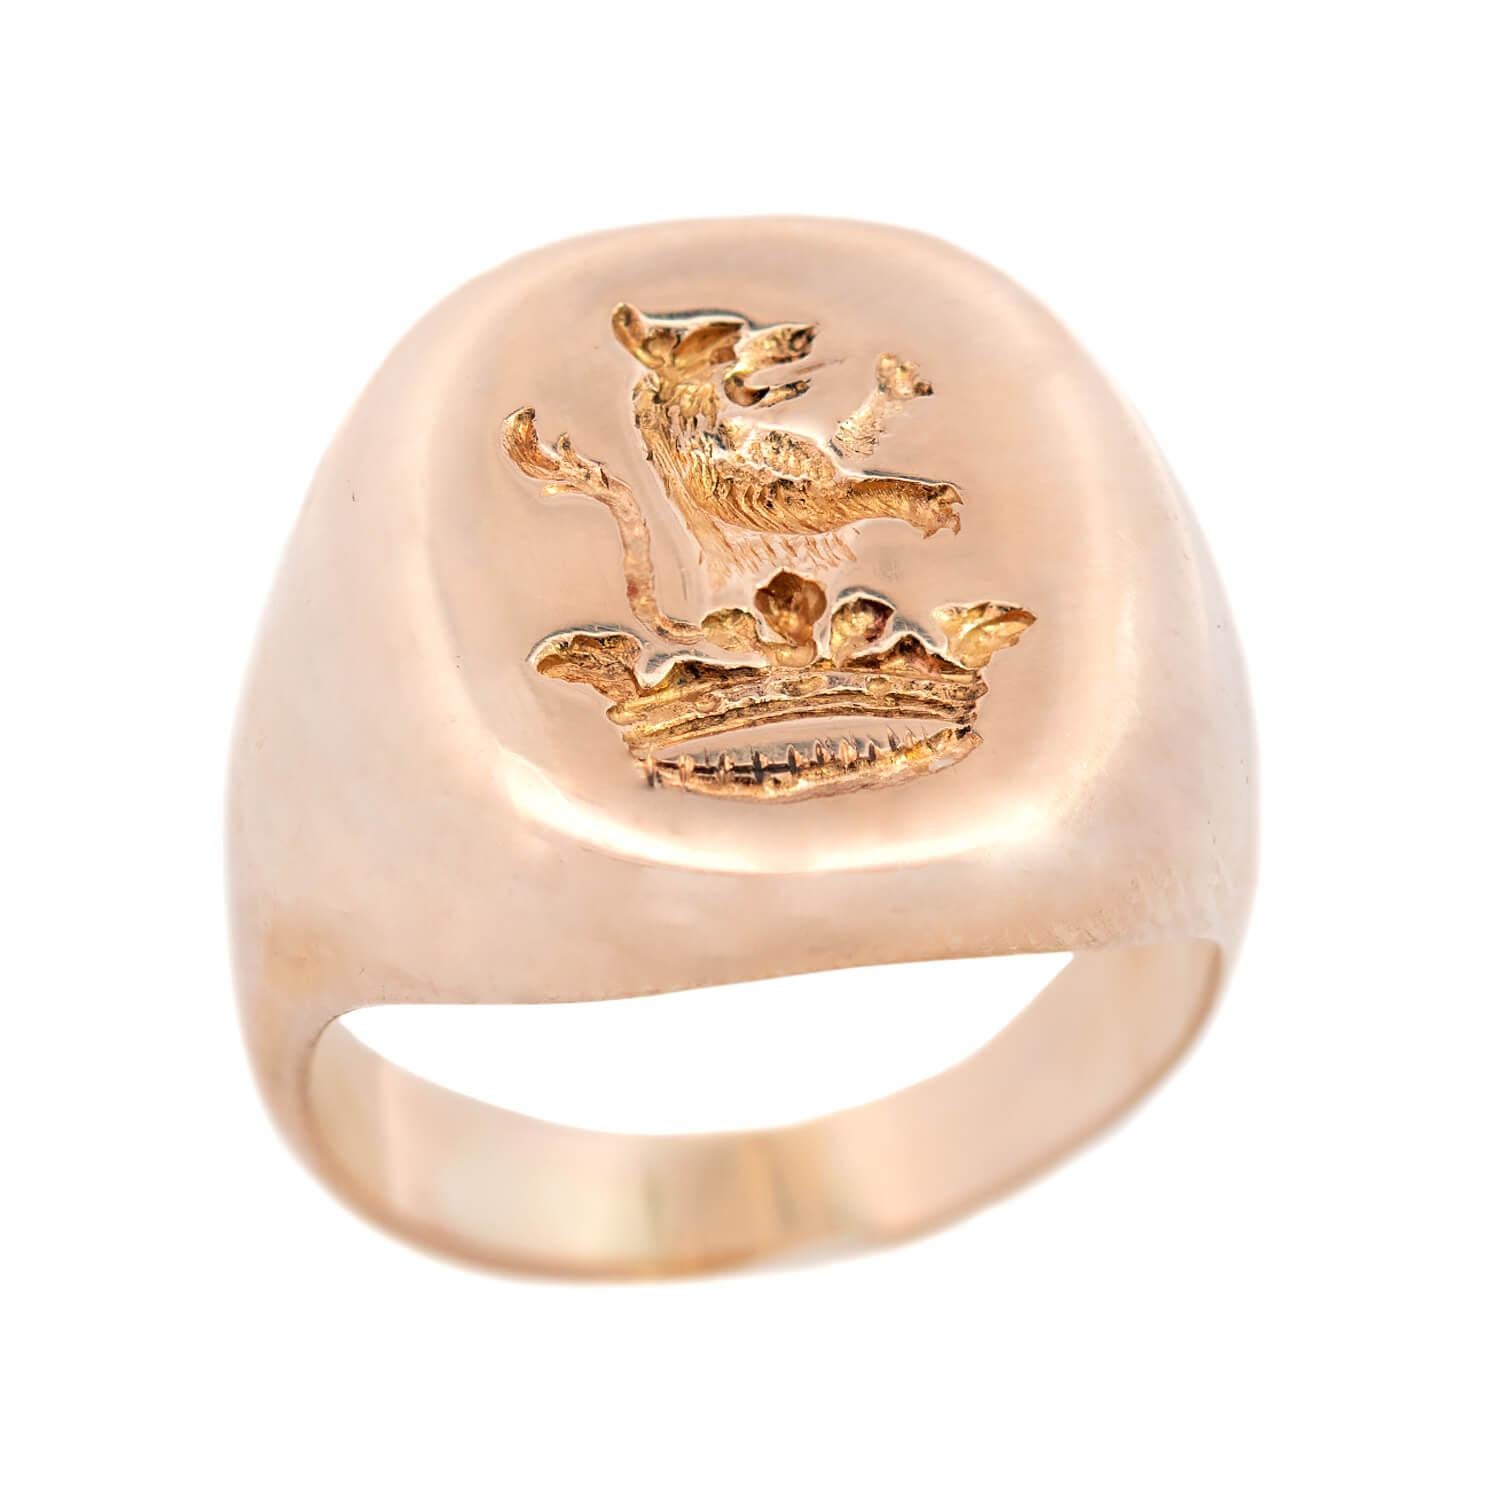 A signet ring can be represented with an intaglio, which is created by carving below the surface of a stone, or by a simple smooth seal. Its purpose would have been to seal the wax of a letter or note.

An incredible and unusual gold signet ring